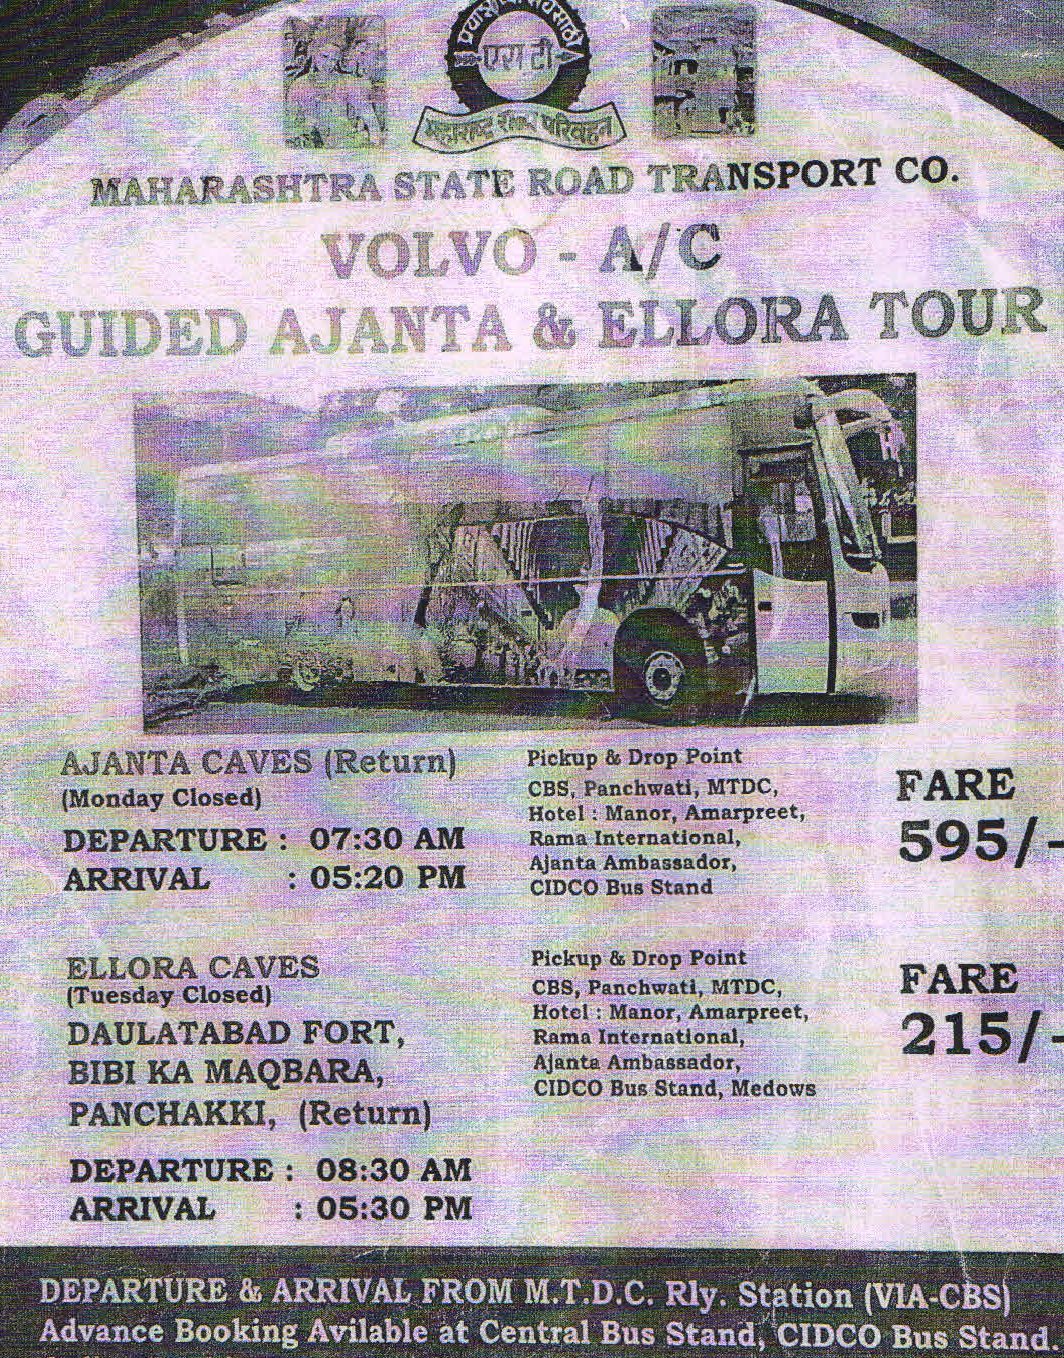 MSRTC tourist bus for Ajanta and Ellora Caves